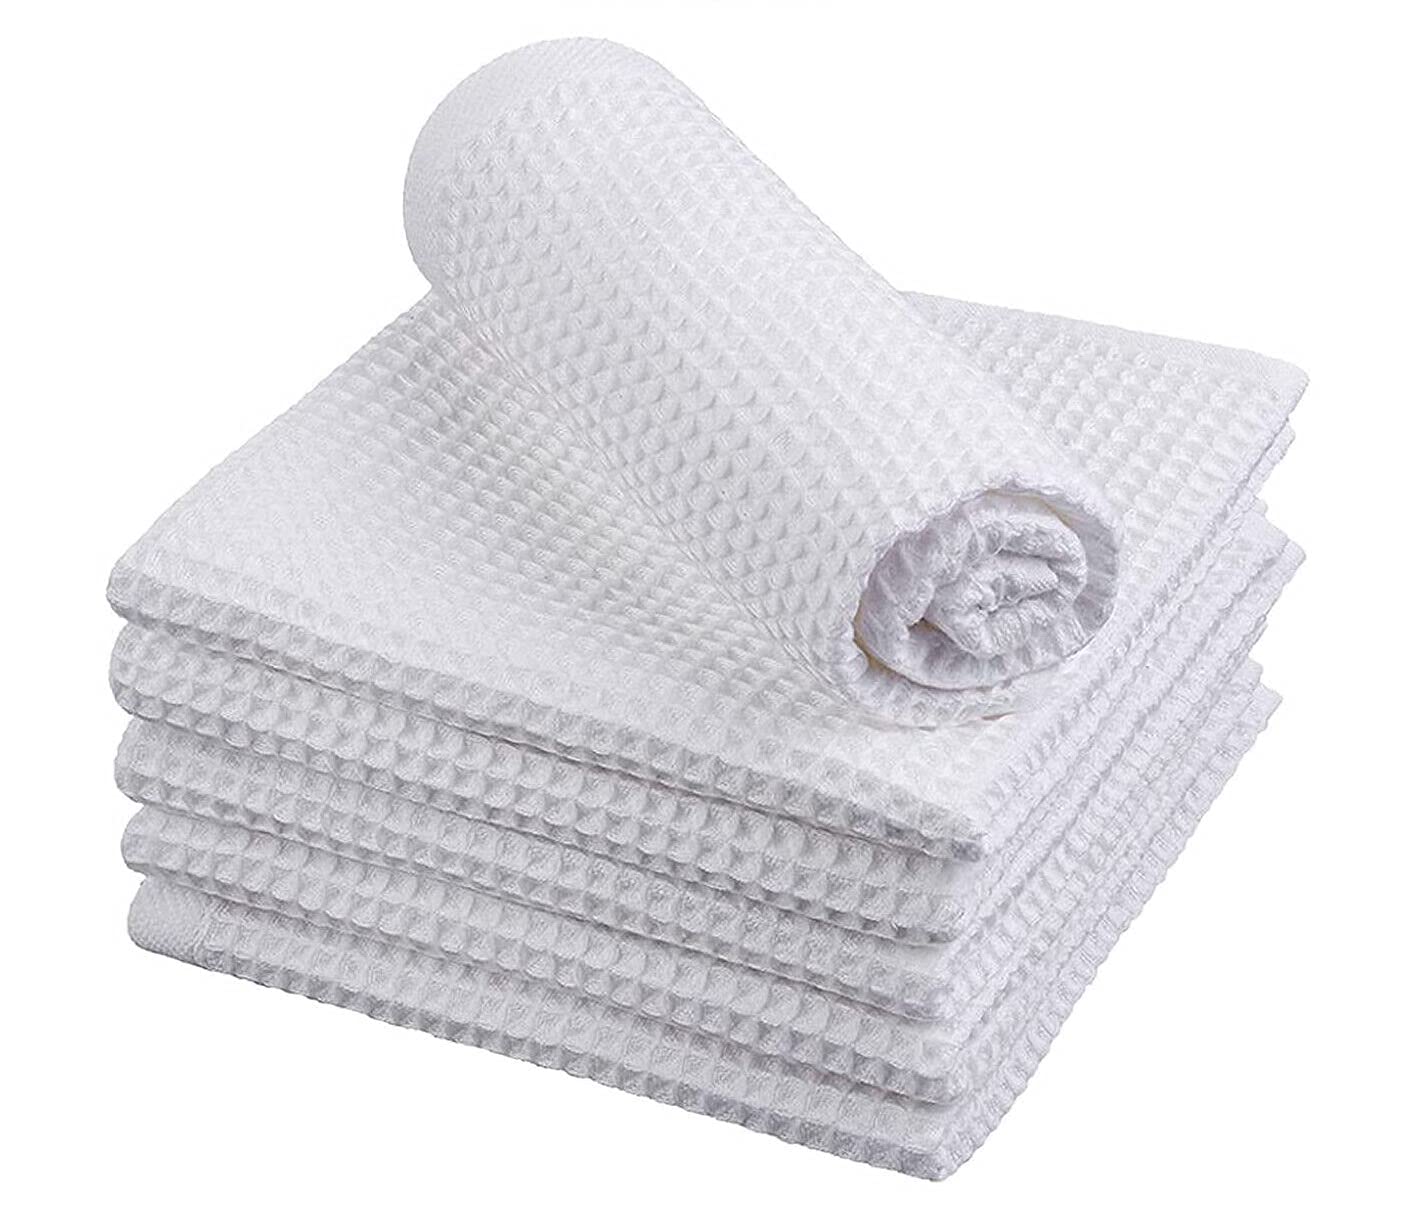 Linen Home Extra Large Tea Towel Pack of 6 Waffle Towels Set 50 X 70CM Cotton Bar Teatowels Sets Kitchen Waffle weave Glass Cleaning Dish Cloths Catering Linen (White, Pack of 6)